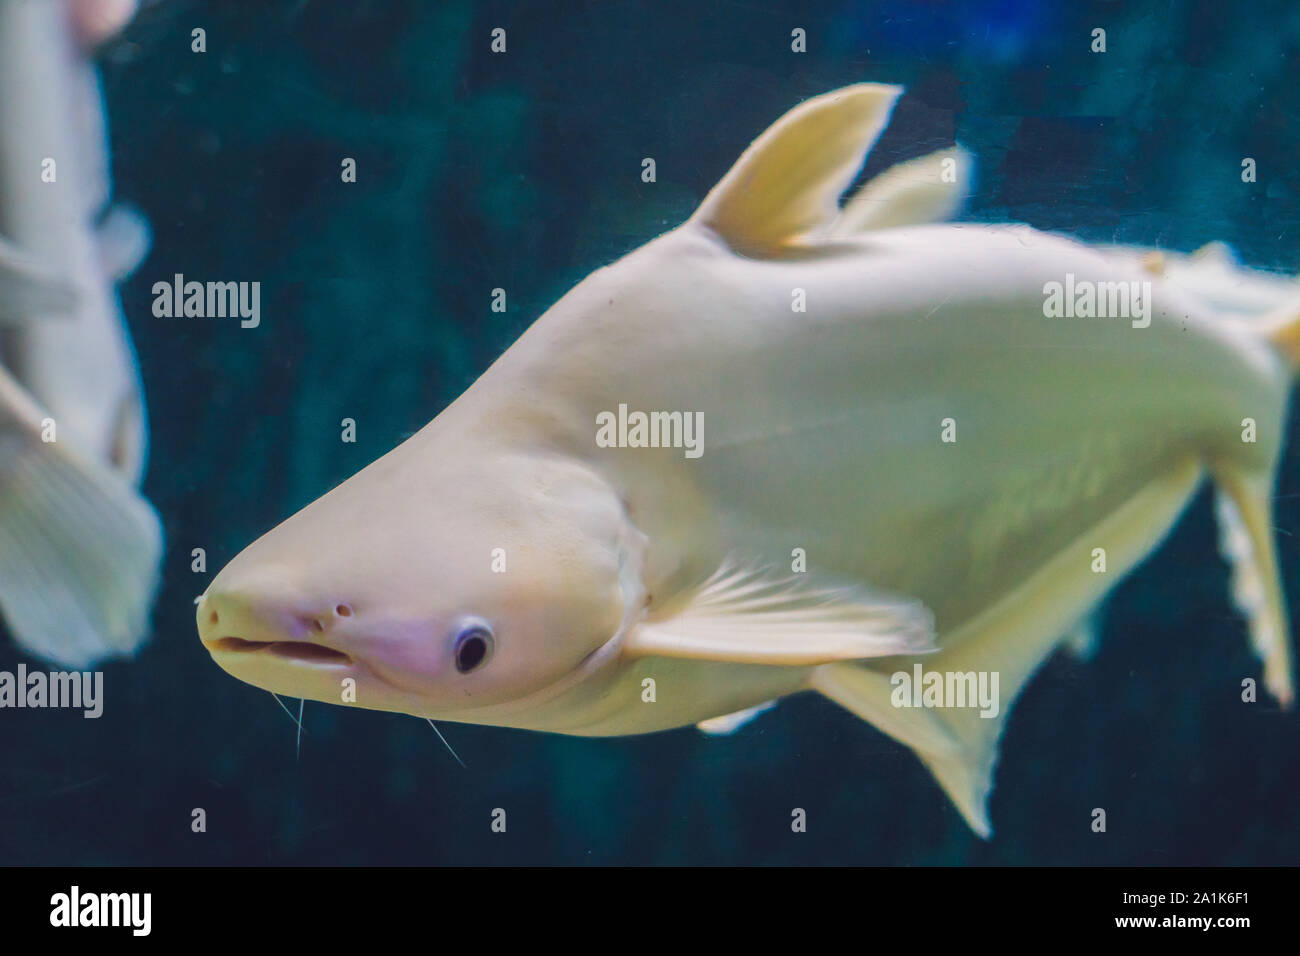 Large white fish with a hump in a tropical aquarium Stock Photo